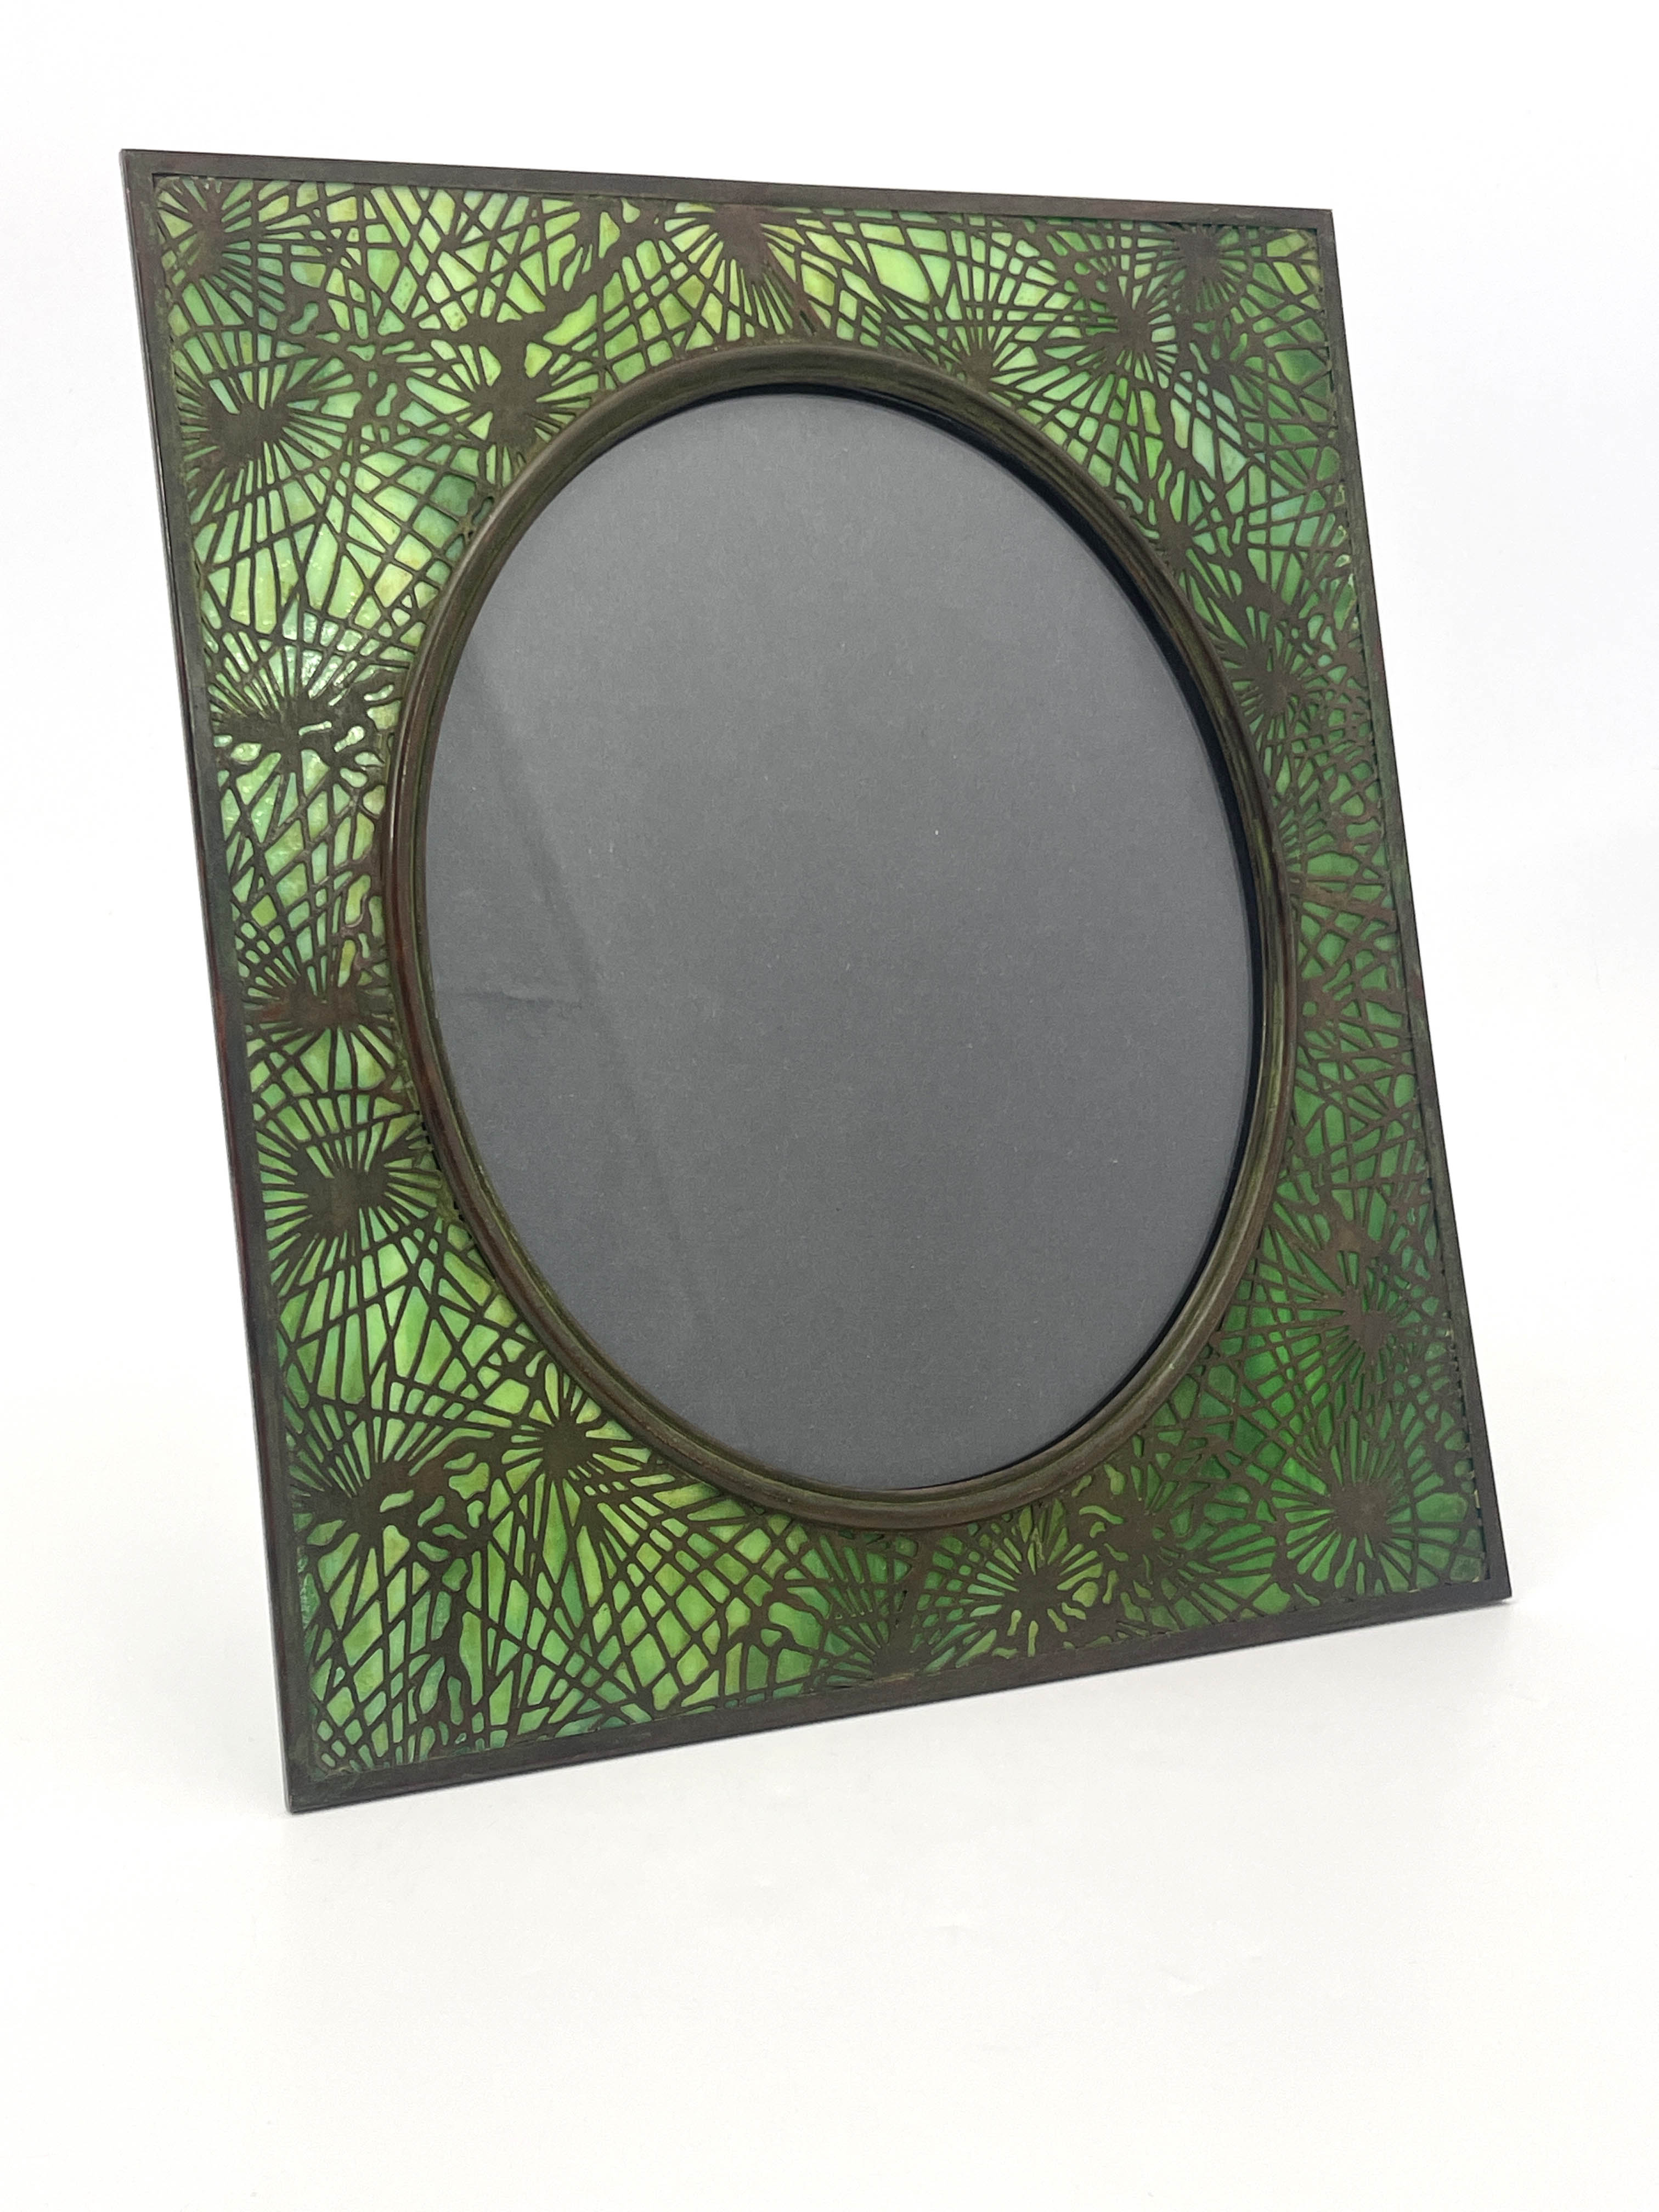 Tiffany Studios, an American Art Nouveau bronze and stained glass photo frame